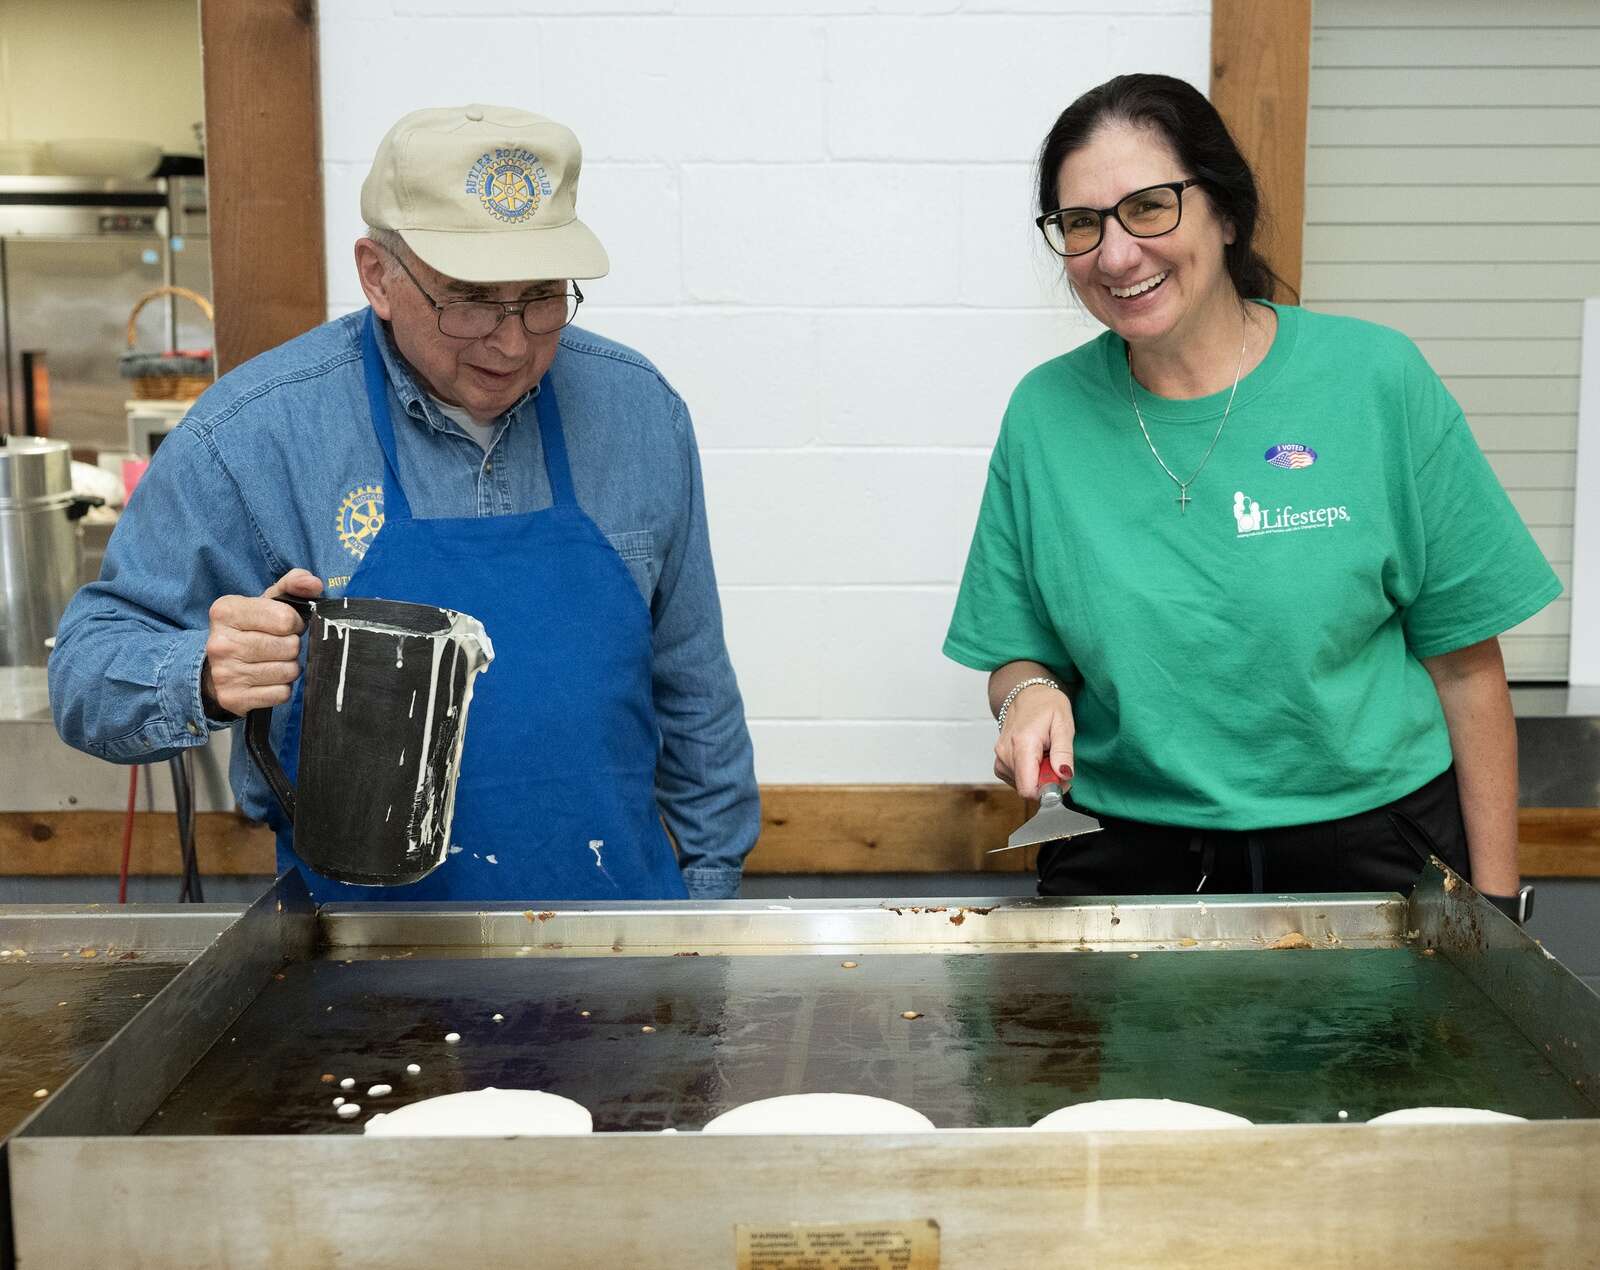 Karen Sue Owens, right, president and CEO of Lifesteps, cooks more pancakes